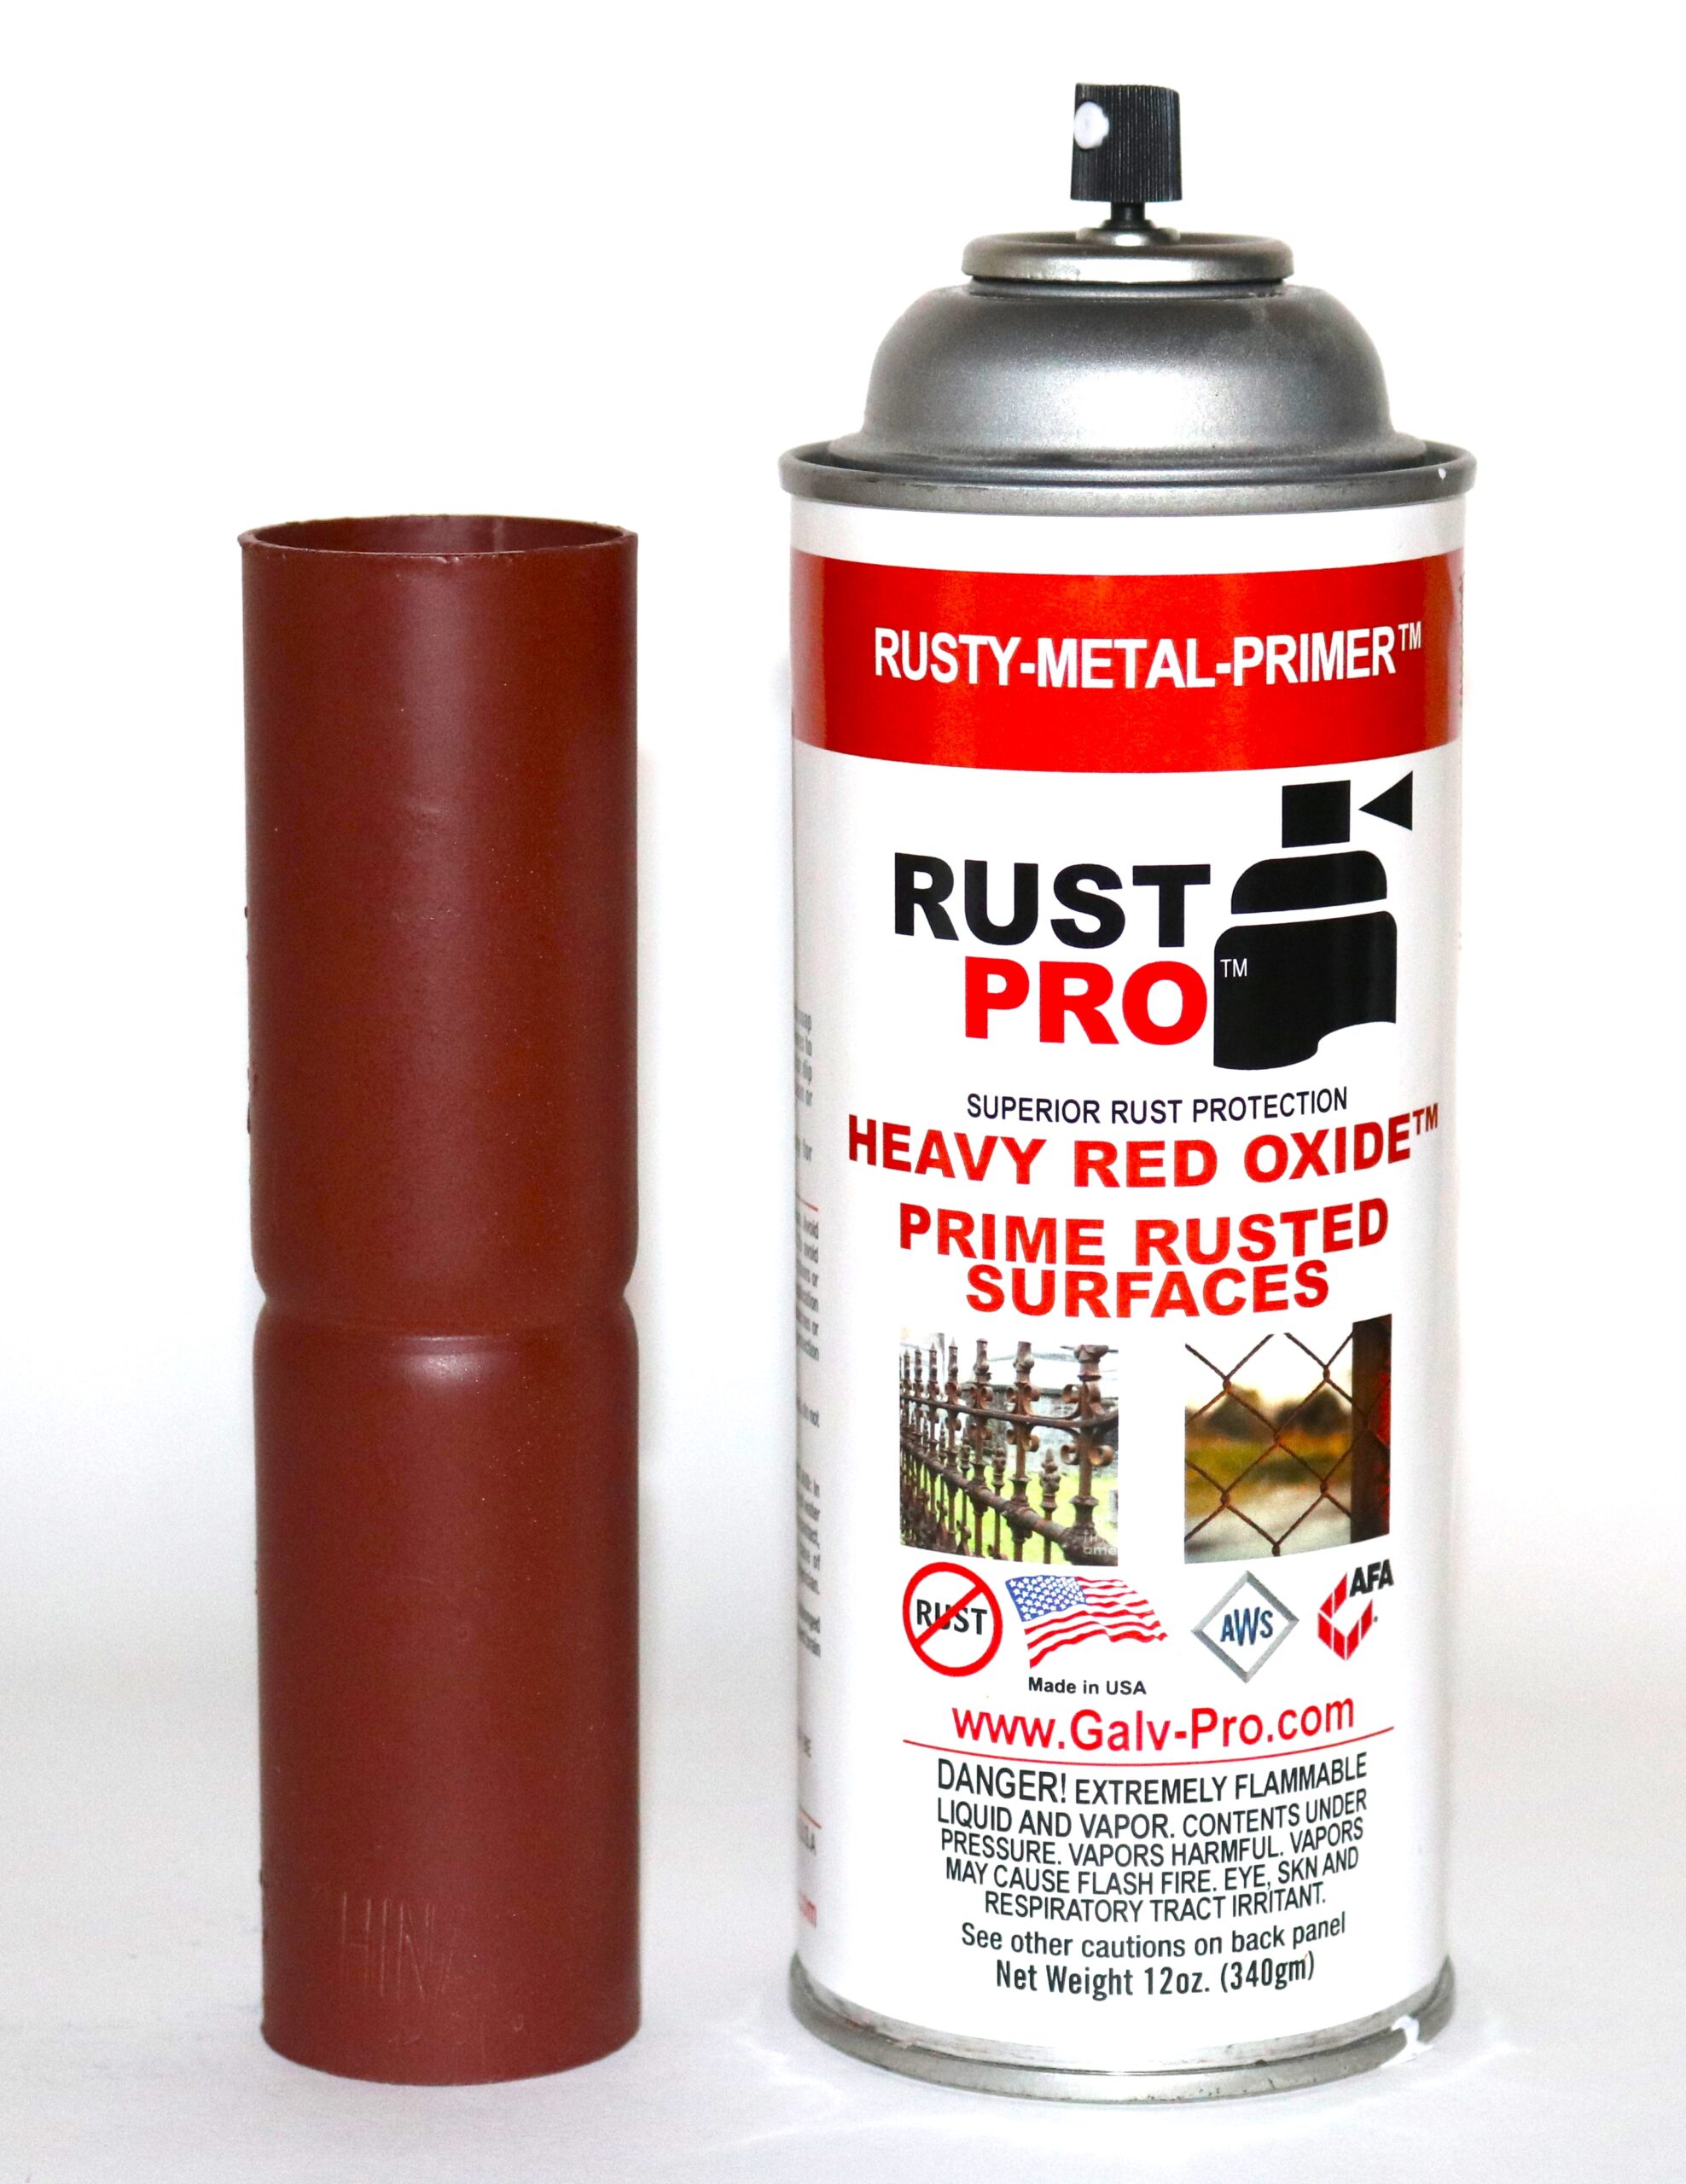 Heavy Red Oxide Primer (hematite oxide) / RO-350 / 12-12 oz cans